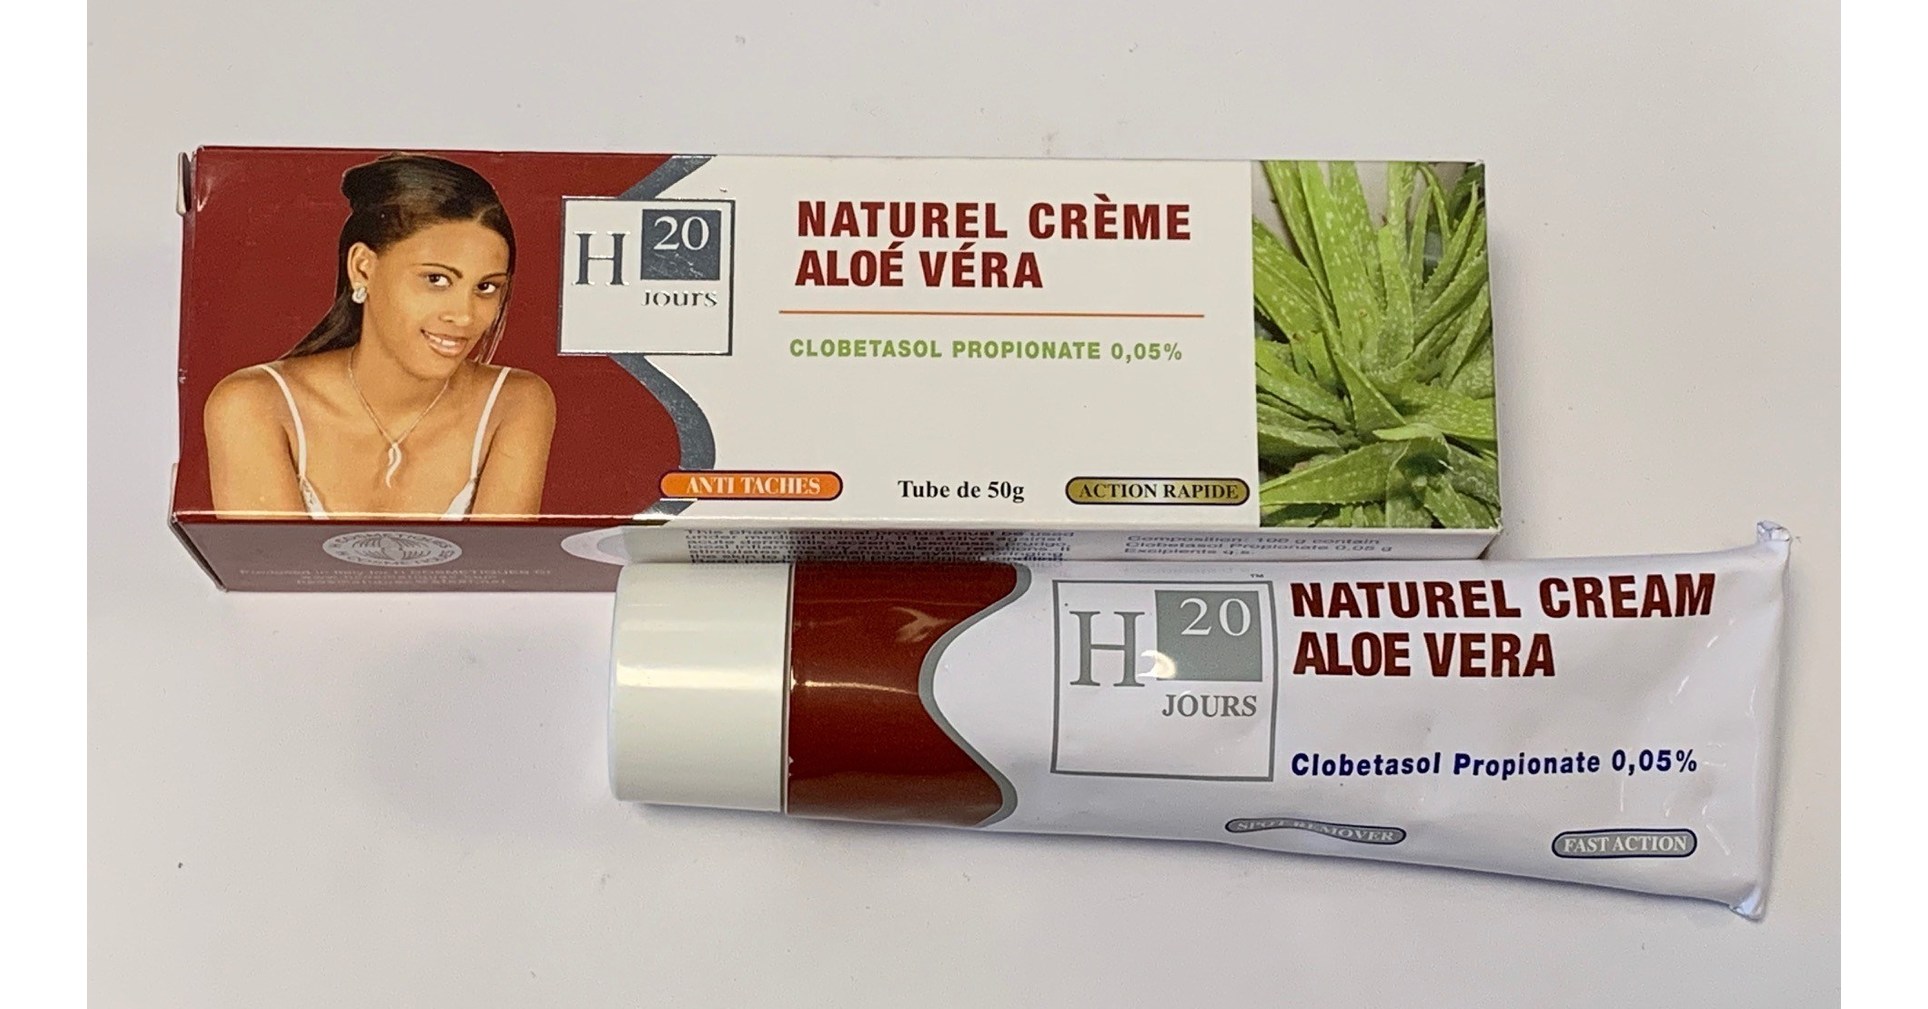 Health Canada has seized unauthorized health products, including six prescription skin products that may pose serious health risks, from the Excel Beauty Supply store located at the Albion Center in Etobicoke, Ontario